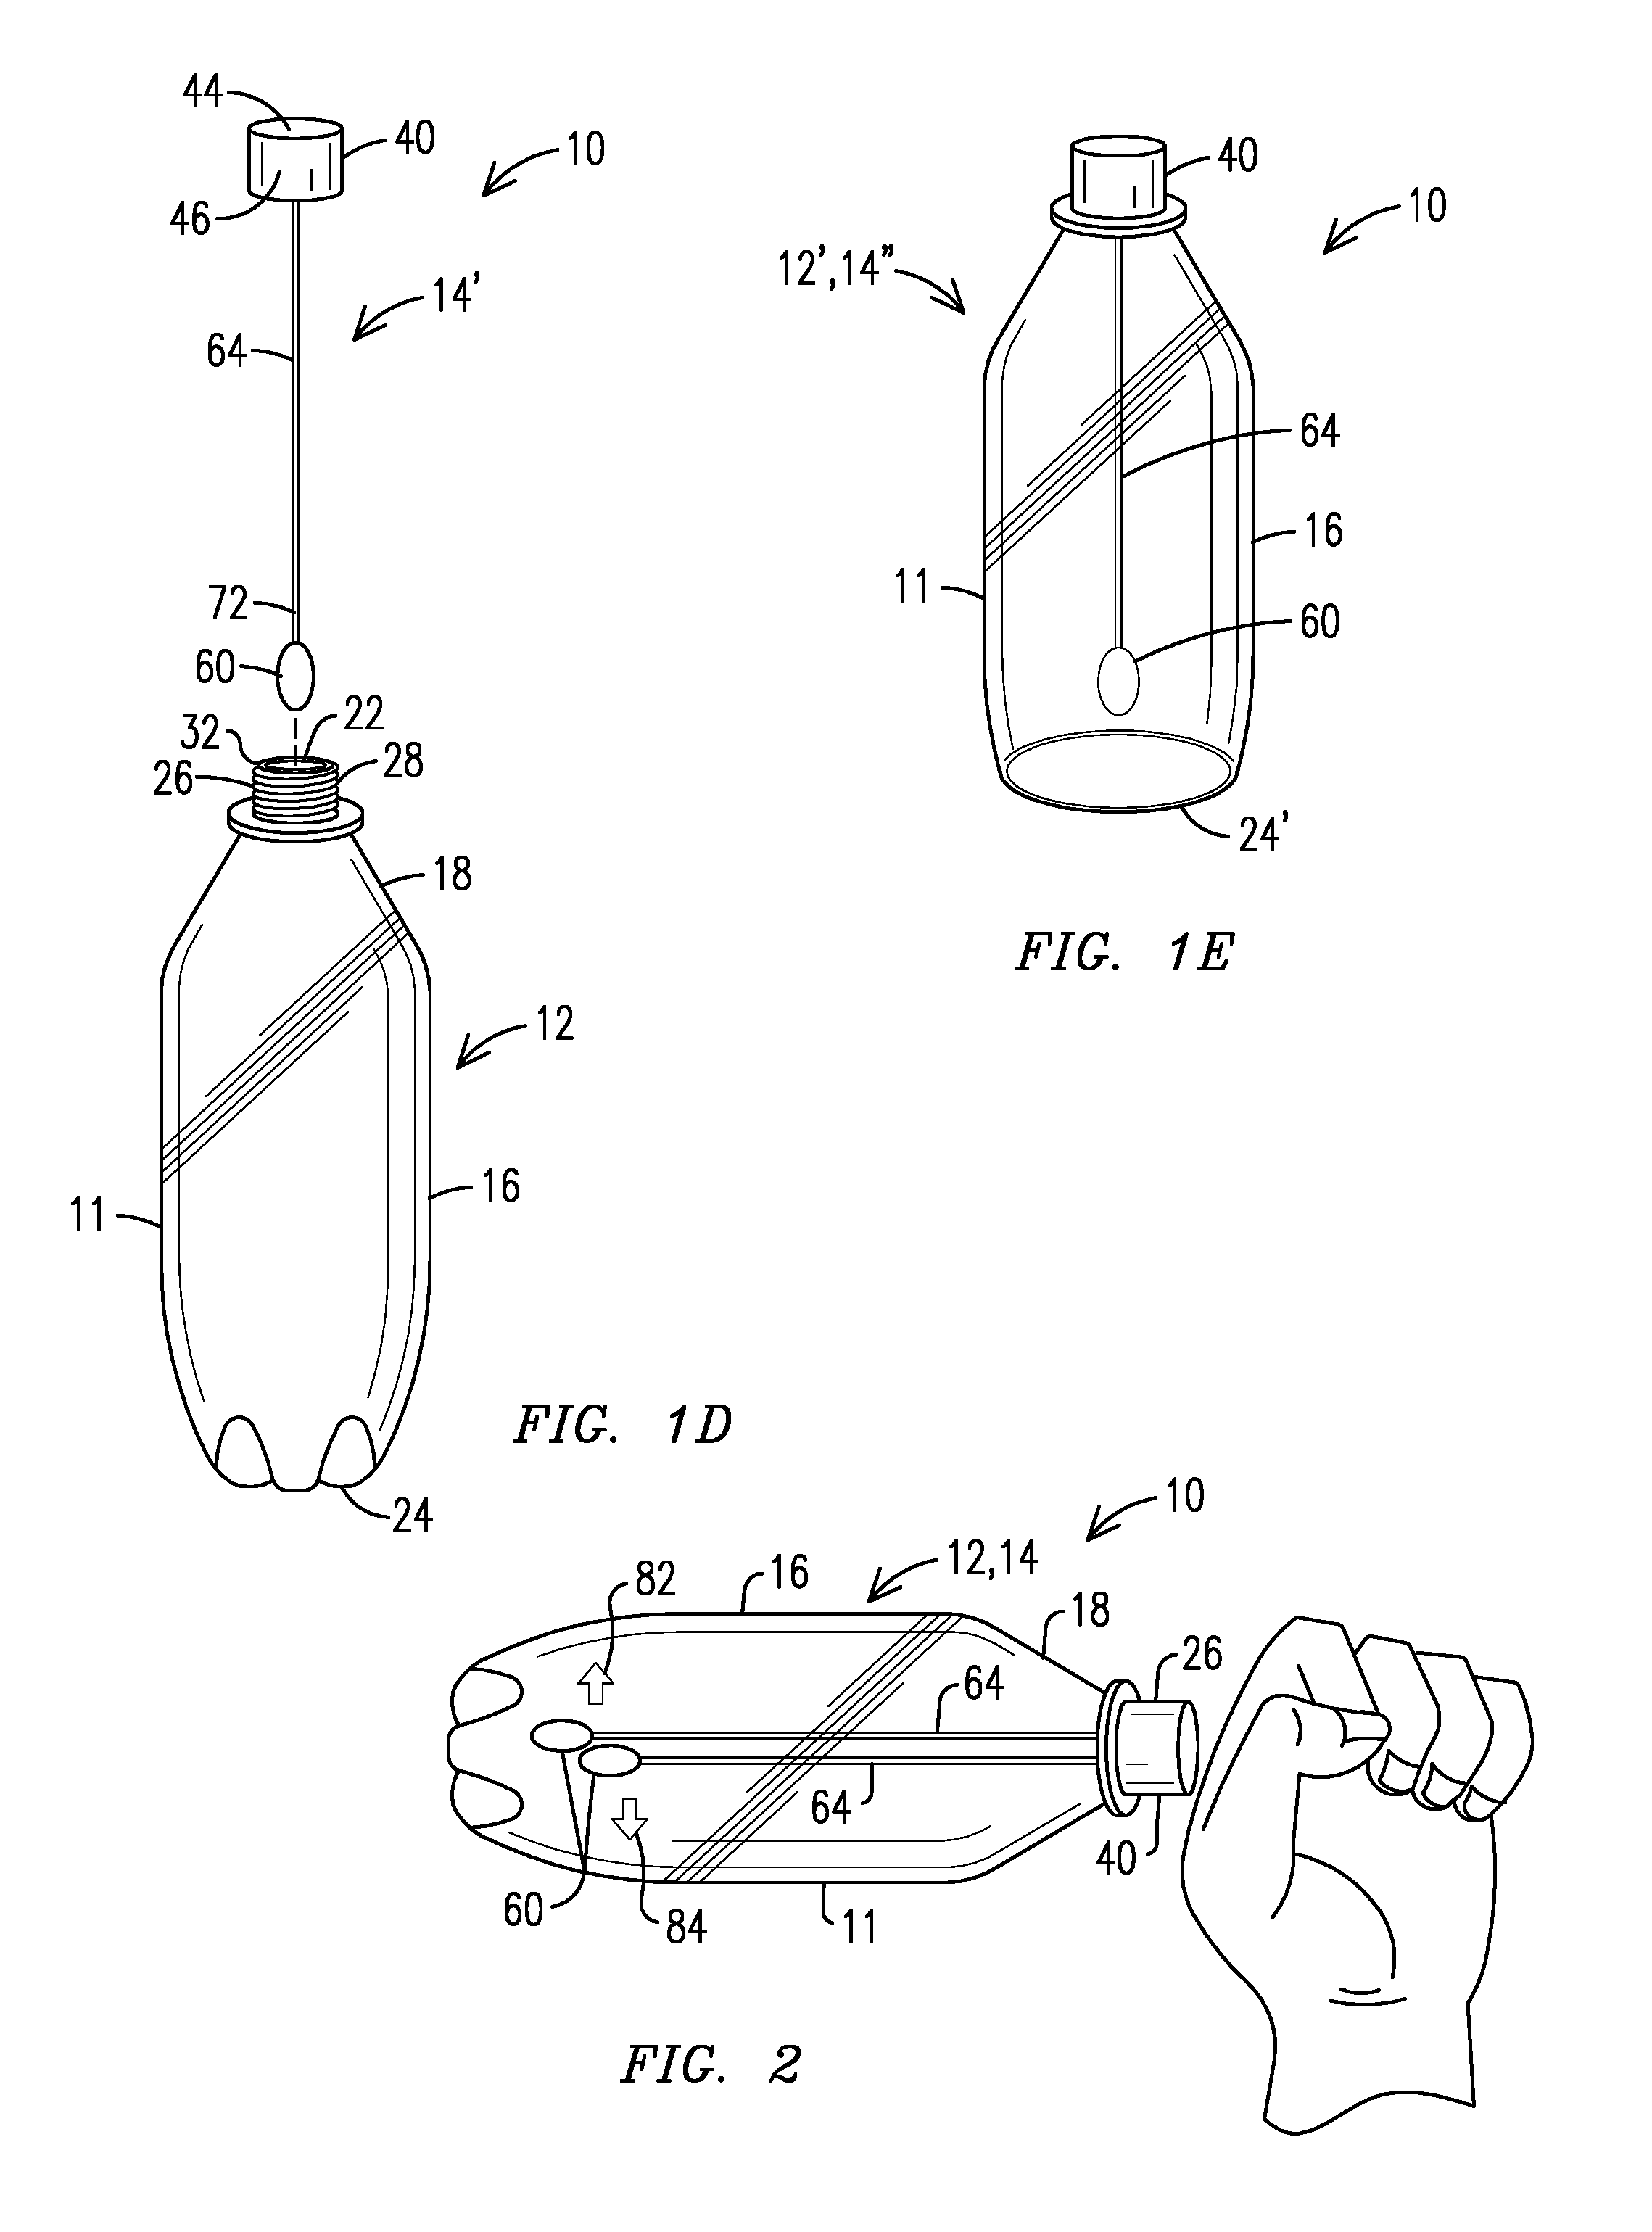 Noise-Making Device